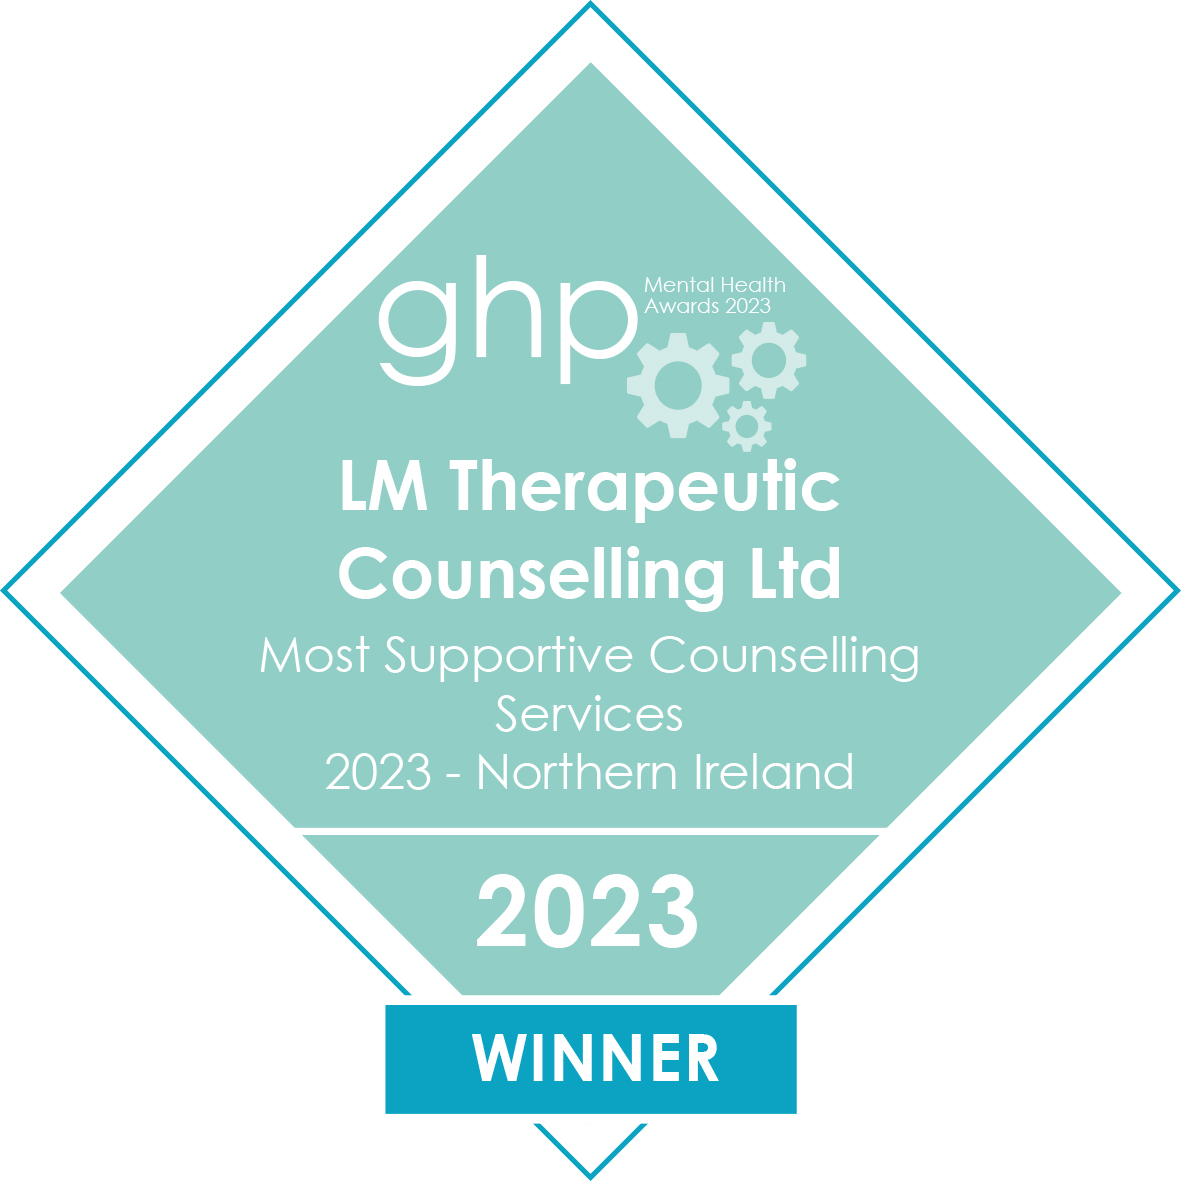 Feb23490_LM Therapeutic Counselling Ltd_Badge